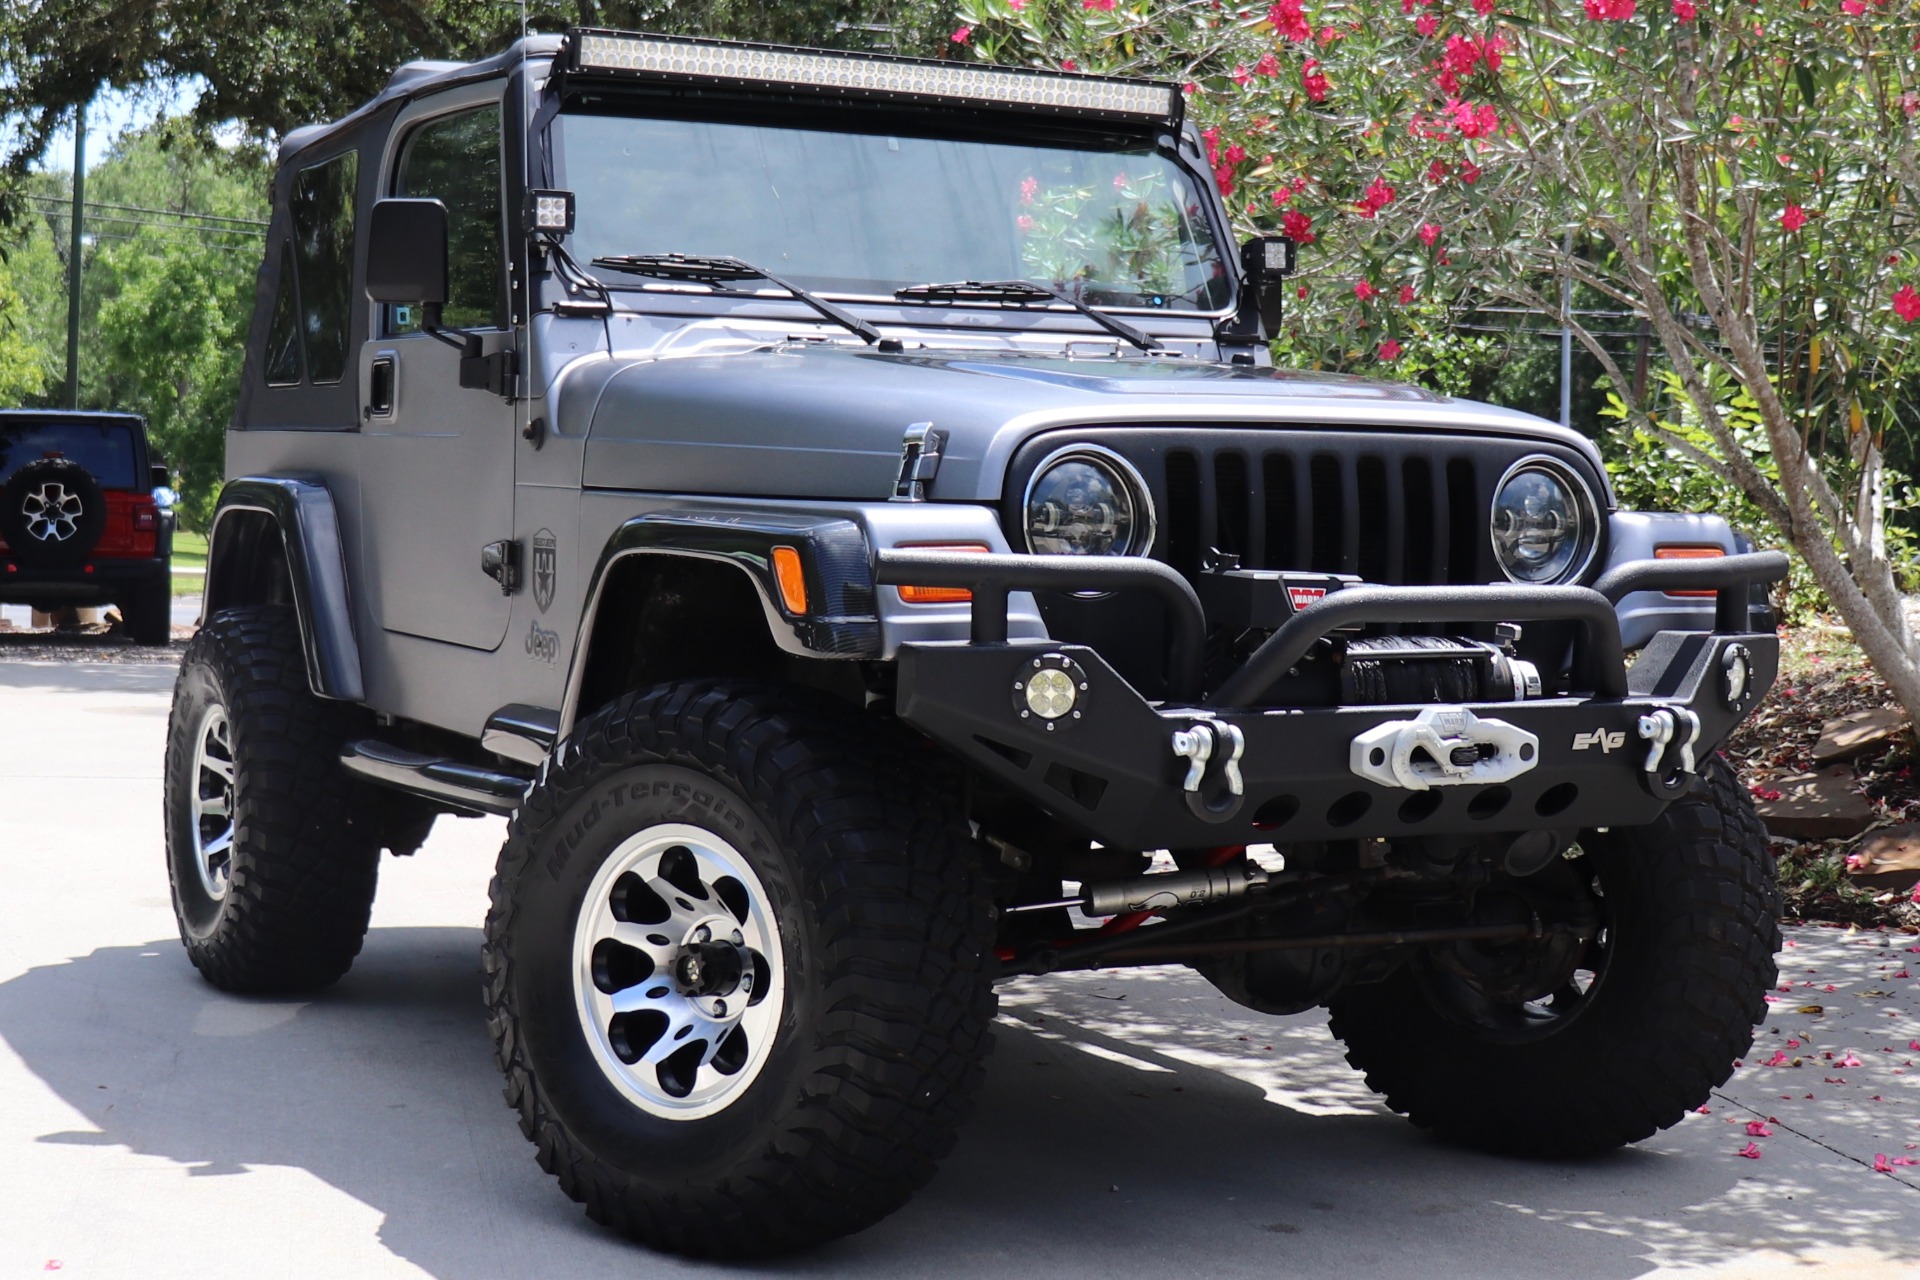 Used 2002 Jeep Wrangler X For Sale ($18,995) | Select Jeeps Inc. Stock  #720216